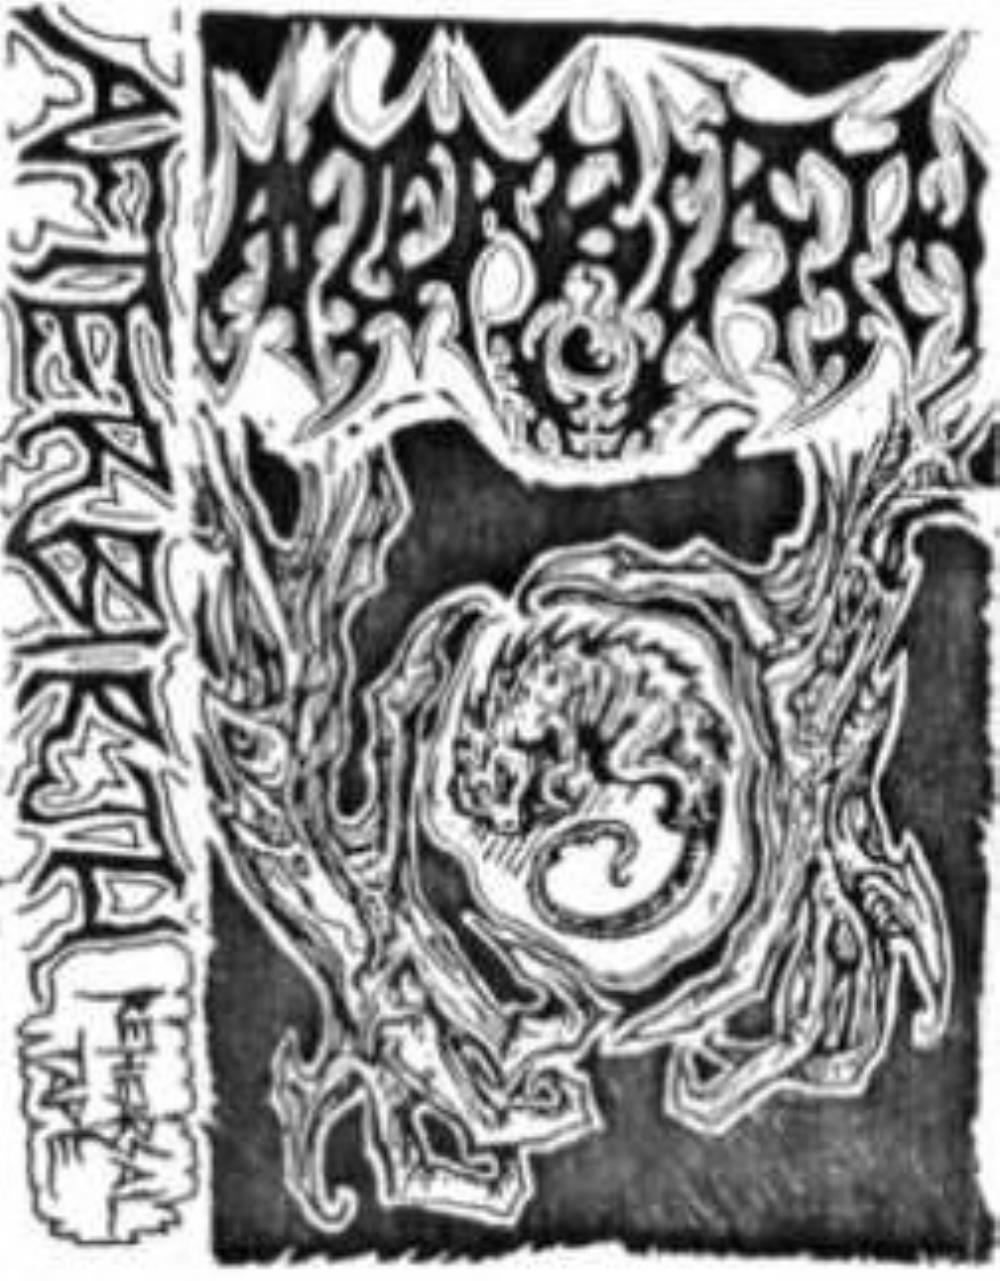 Afterbirth - Rehearsal Tape CD (album) cover